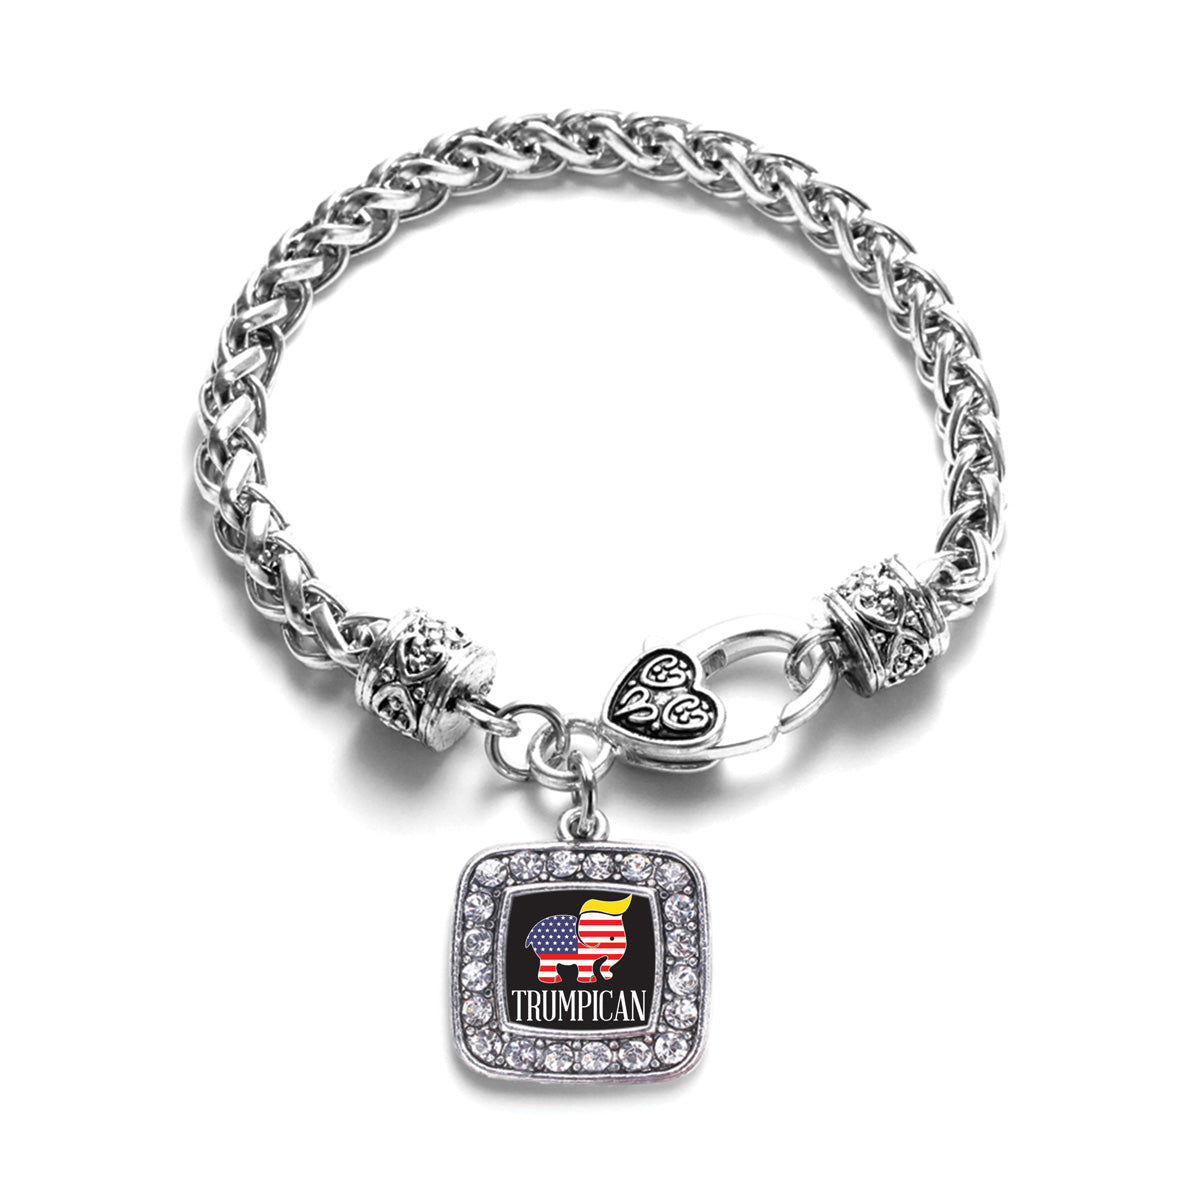 Silver Trumpican Square Charm Braided Bracelet